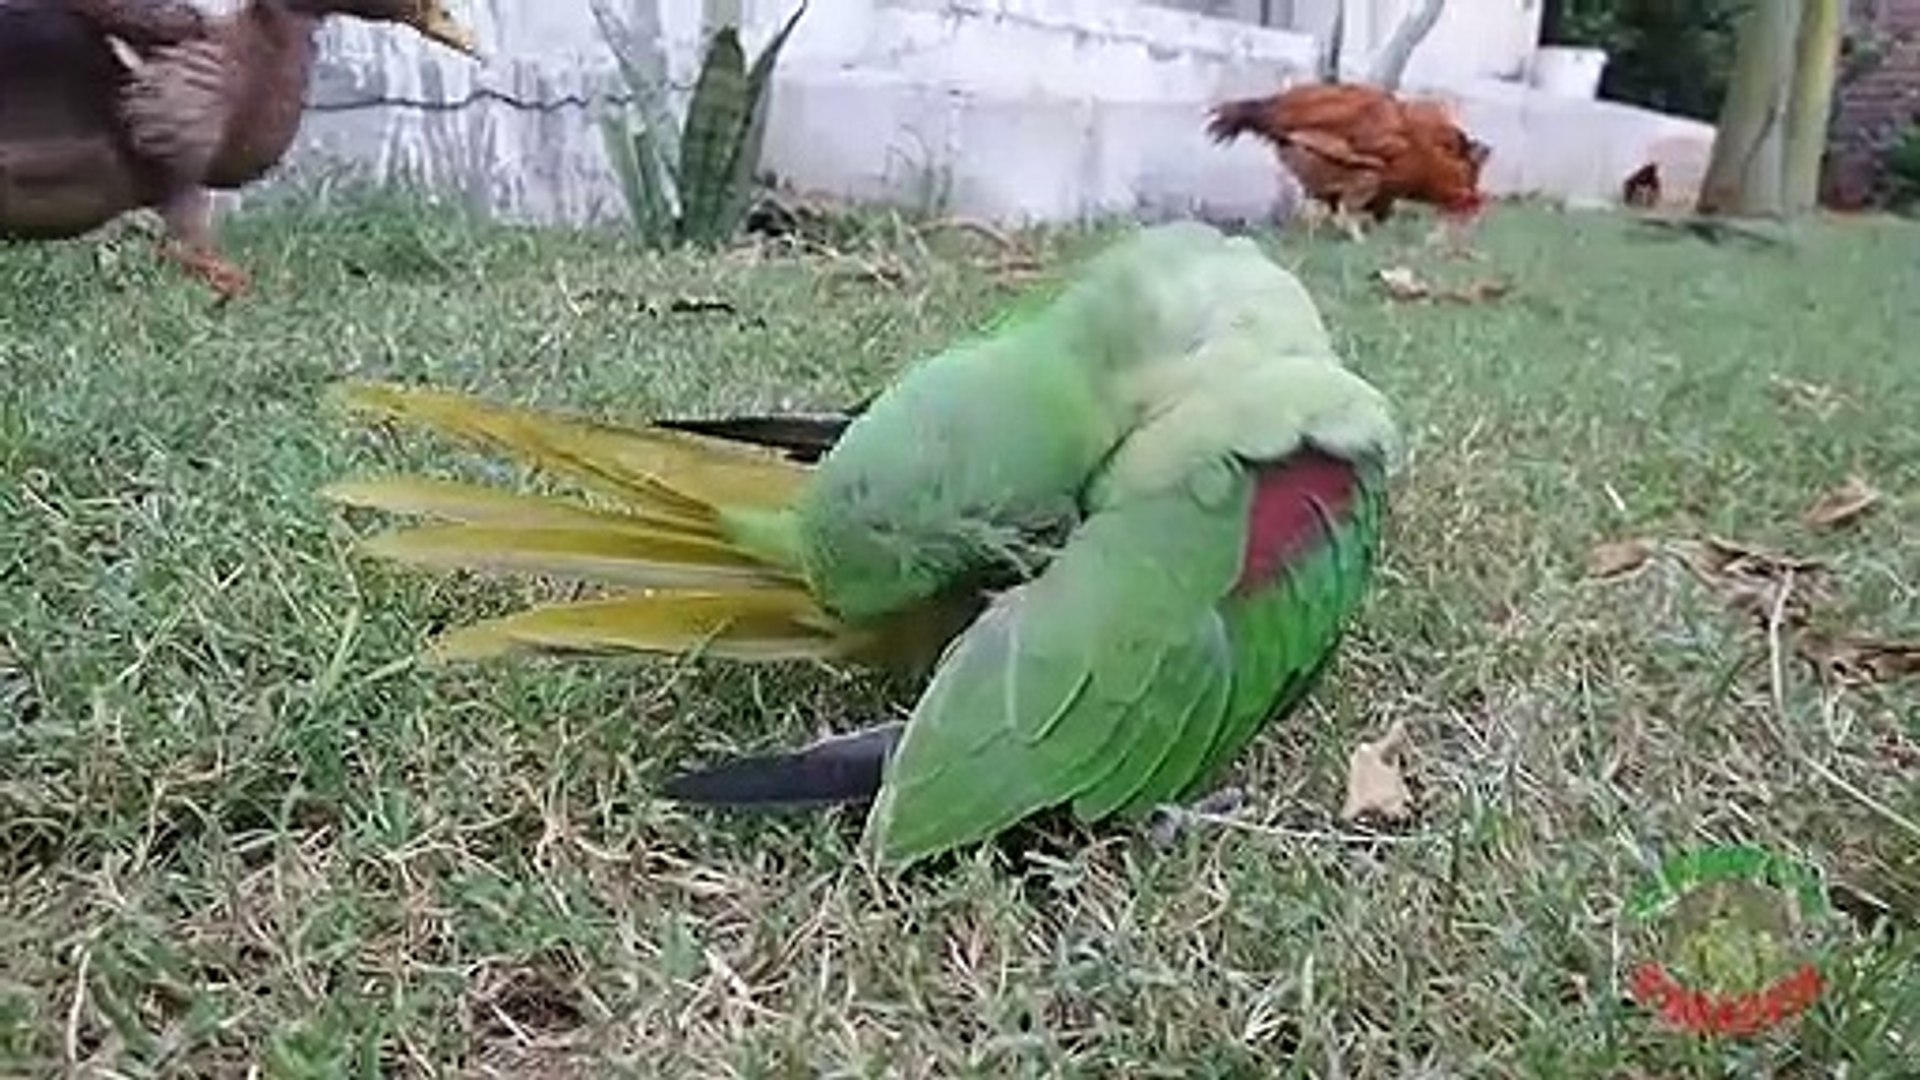 Parrot Watching Rooster Fight